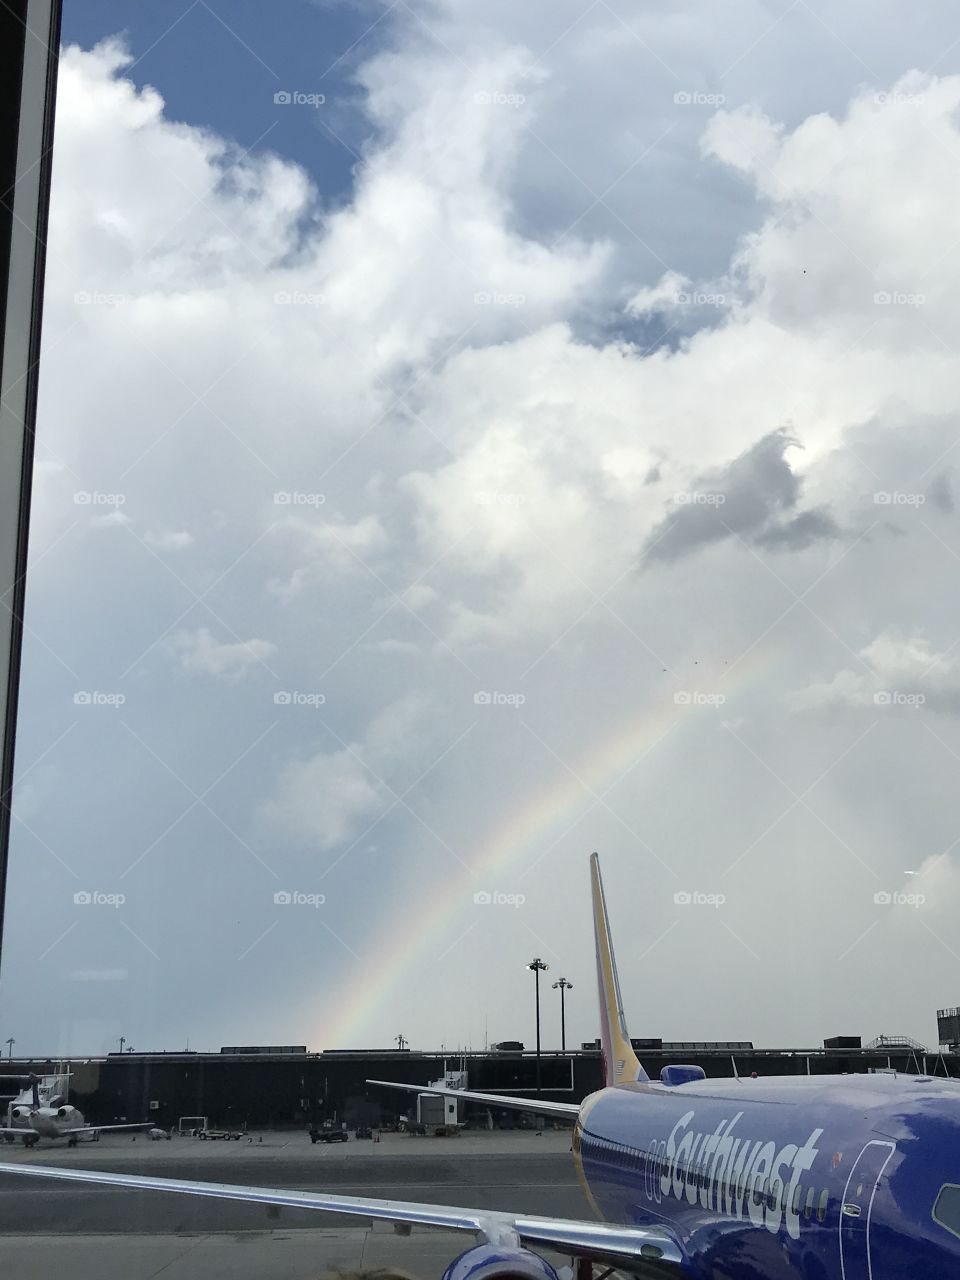 Rainbow at the Airport